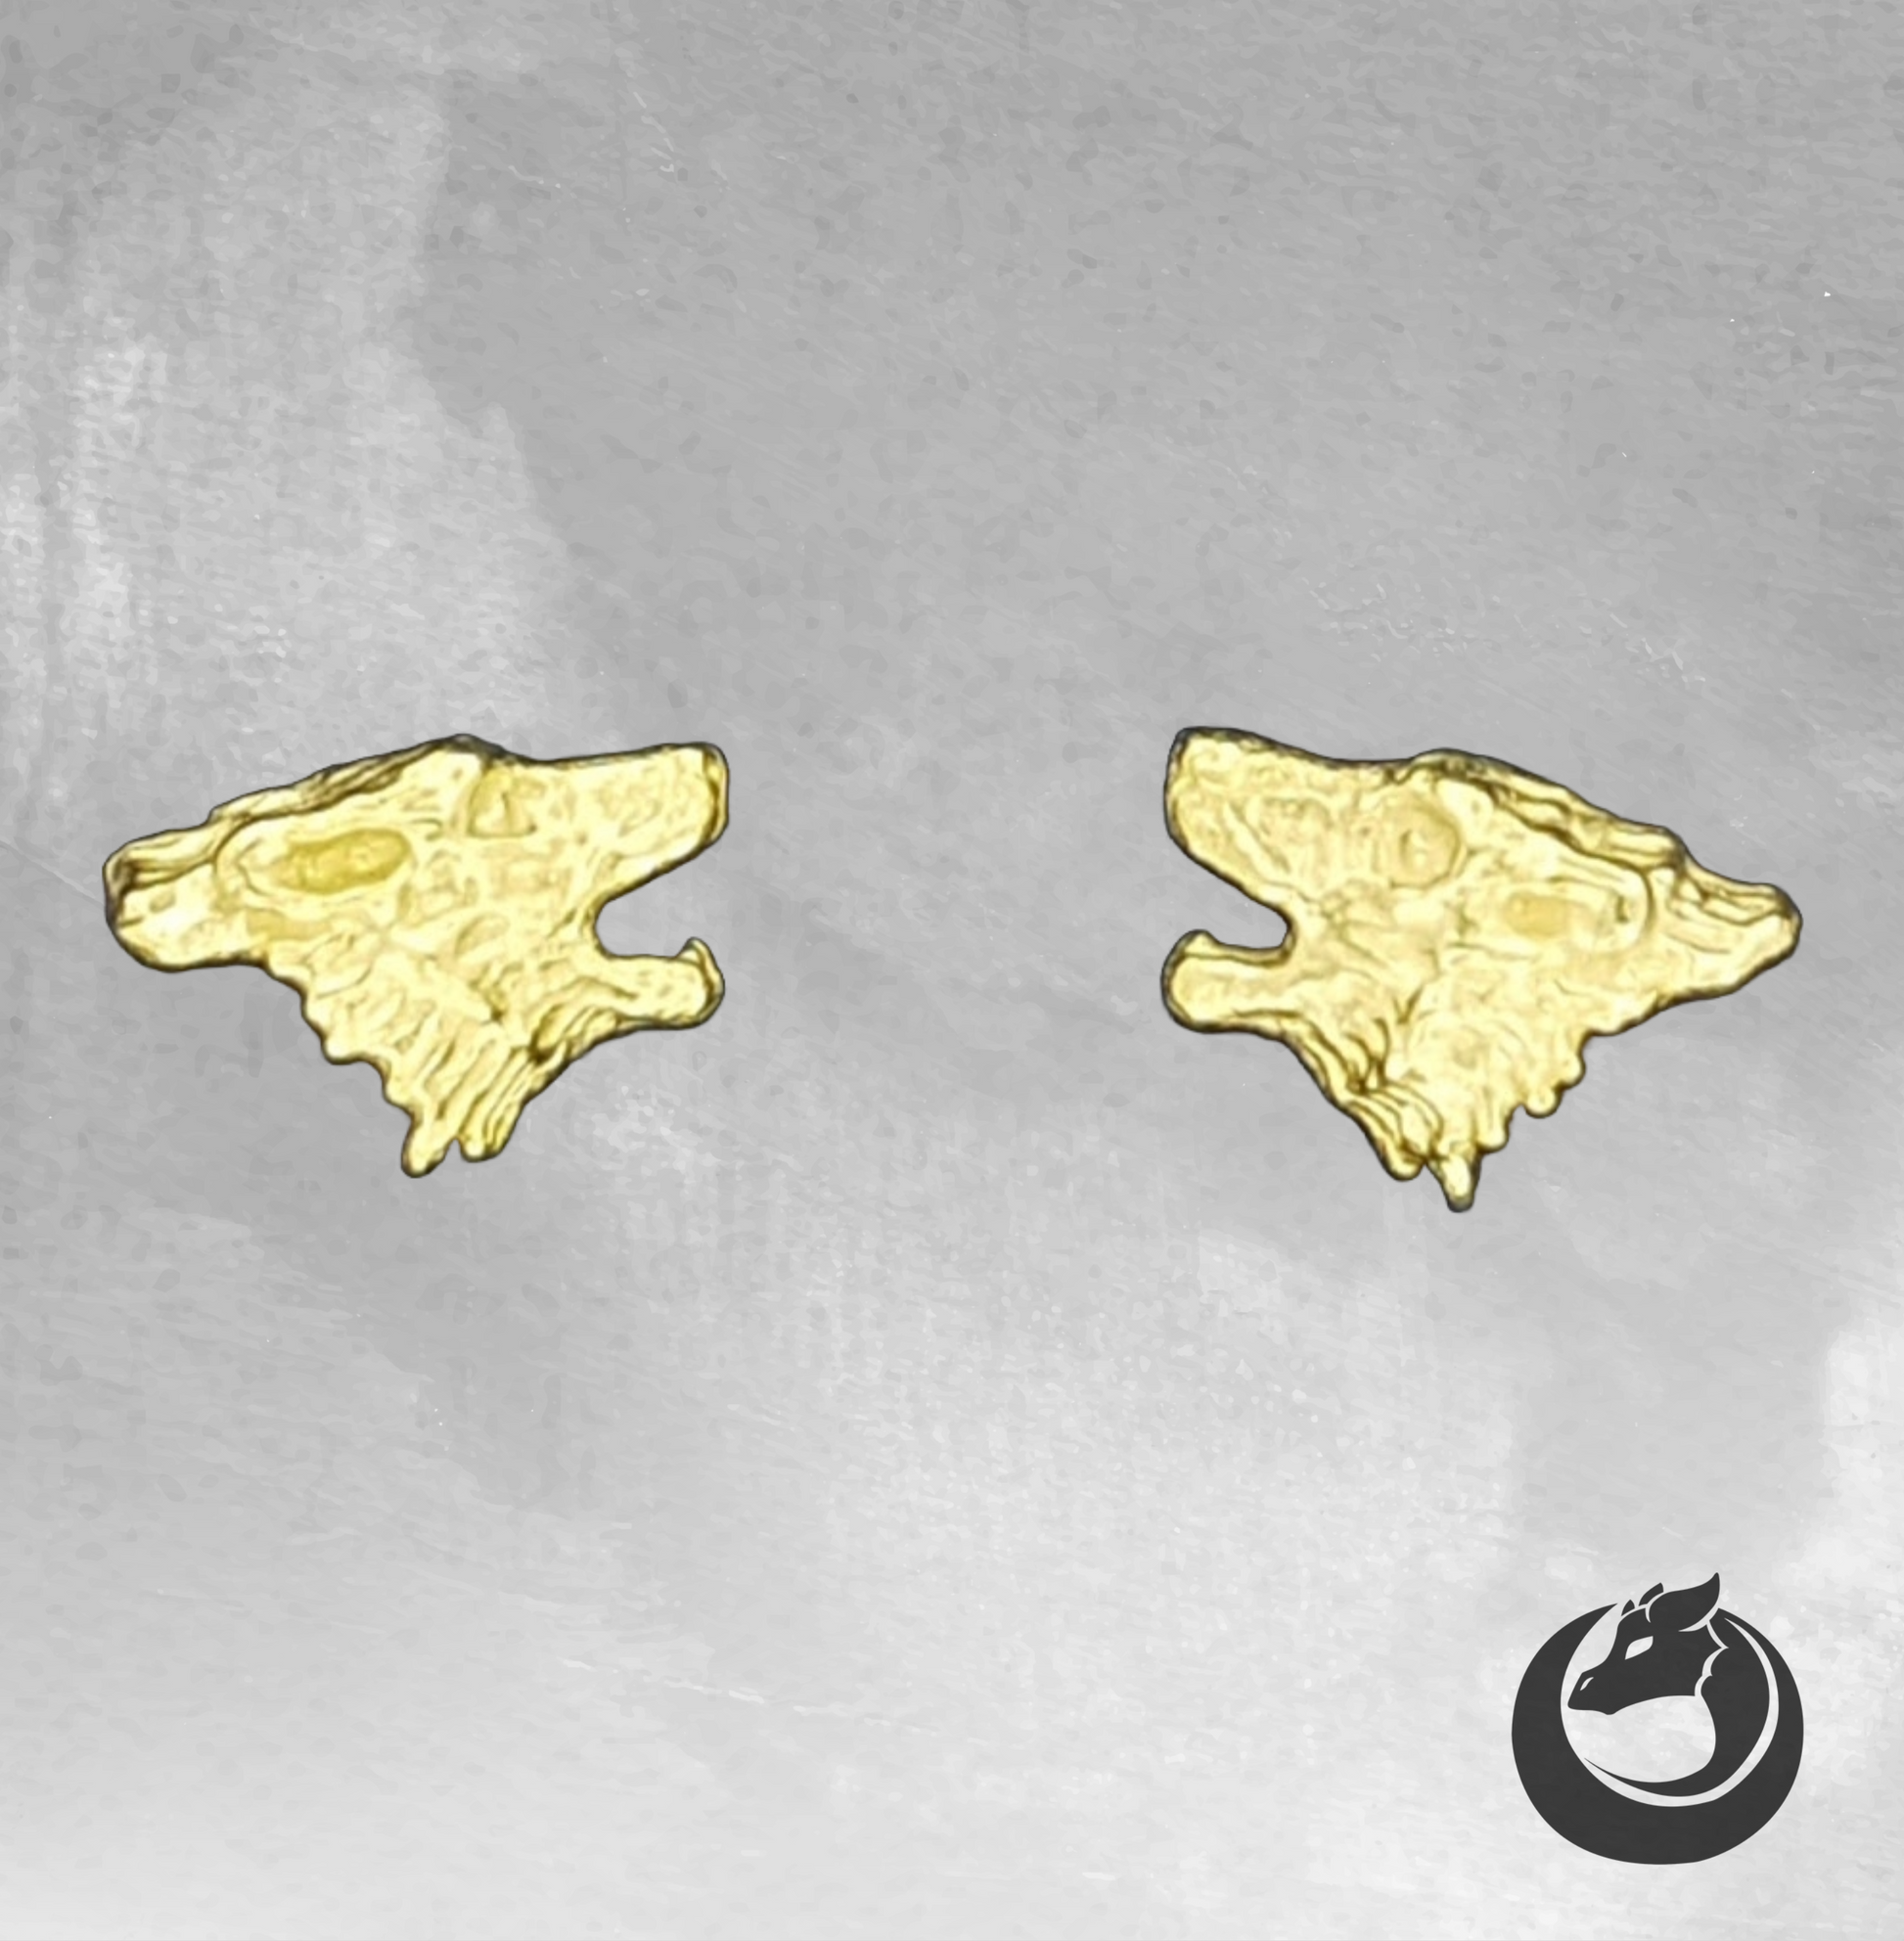 Gold Howling Wolves Earrings made to order, Gold Wolf Stud Earrings, Gold Wolf Earrings, Howling Wolf Gold Earrings, Gold Wolf Jewelry, Gold Wolf Jewellery, Gold Wolves Earrings, Gold Wolves Jewelry, Wolf Lover Earrings, Wolf Lover Jewelry